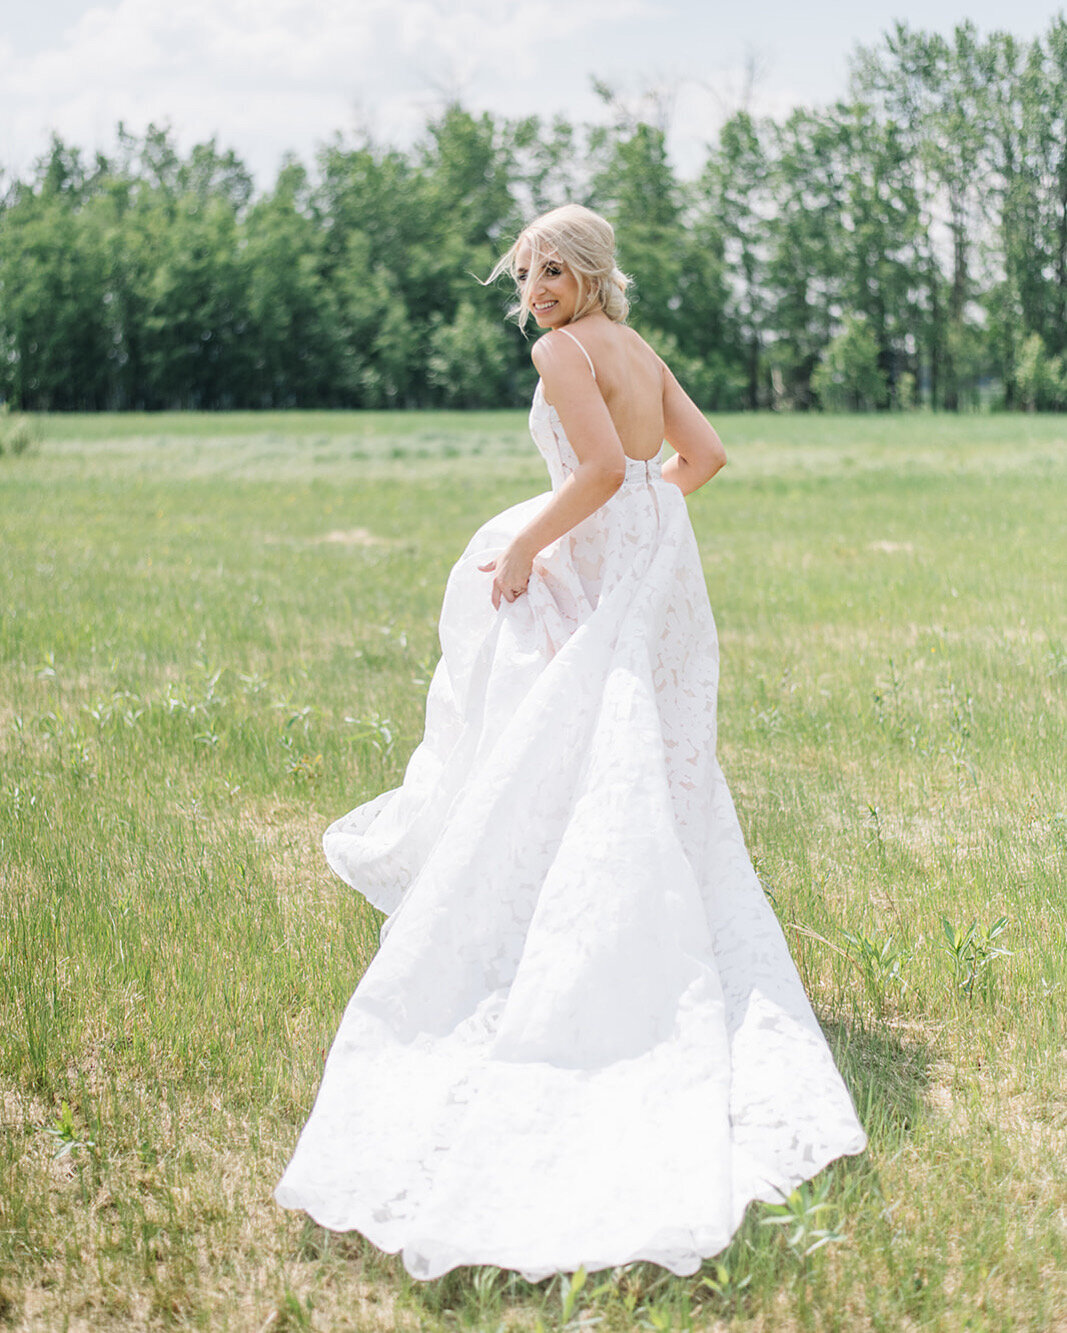 Bride wearing classic wedding gown from Delica Bridal, an elegant bridal boutique based in Edmonton, Alberta. Featured on the Brontë Bride Vendor Guide.